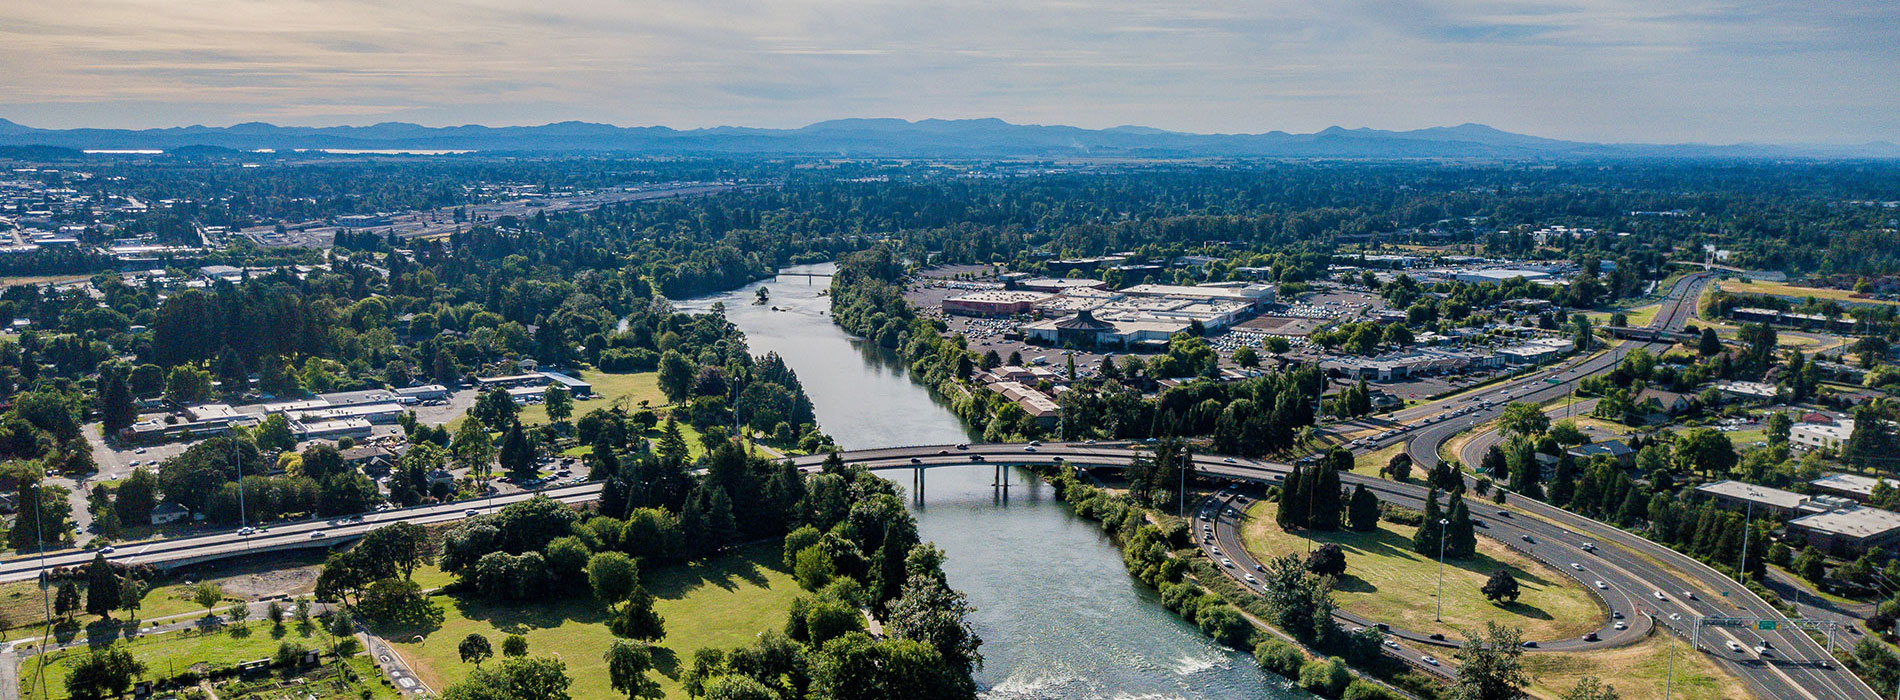 Eugene, OR downtown waterway